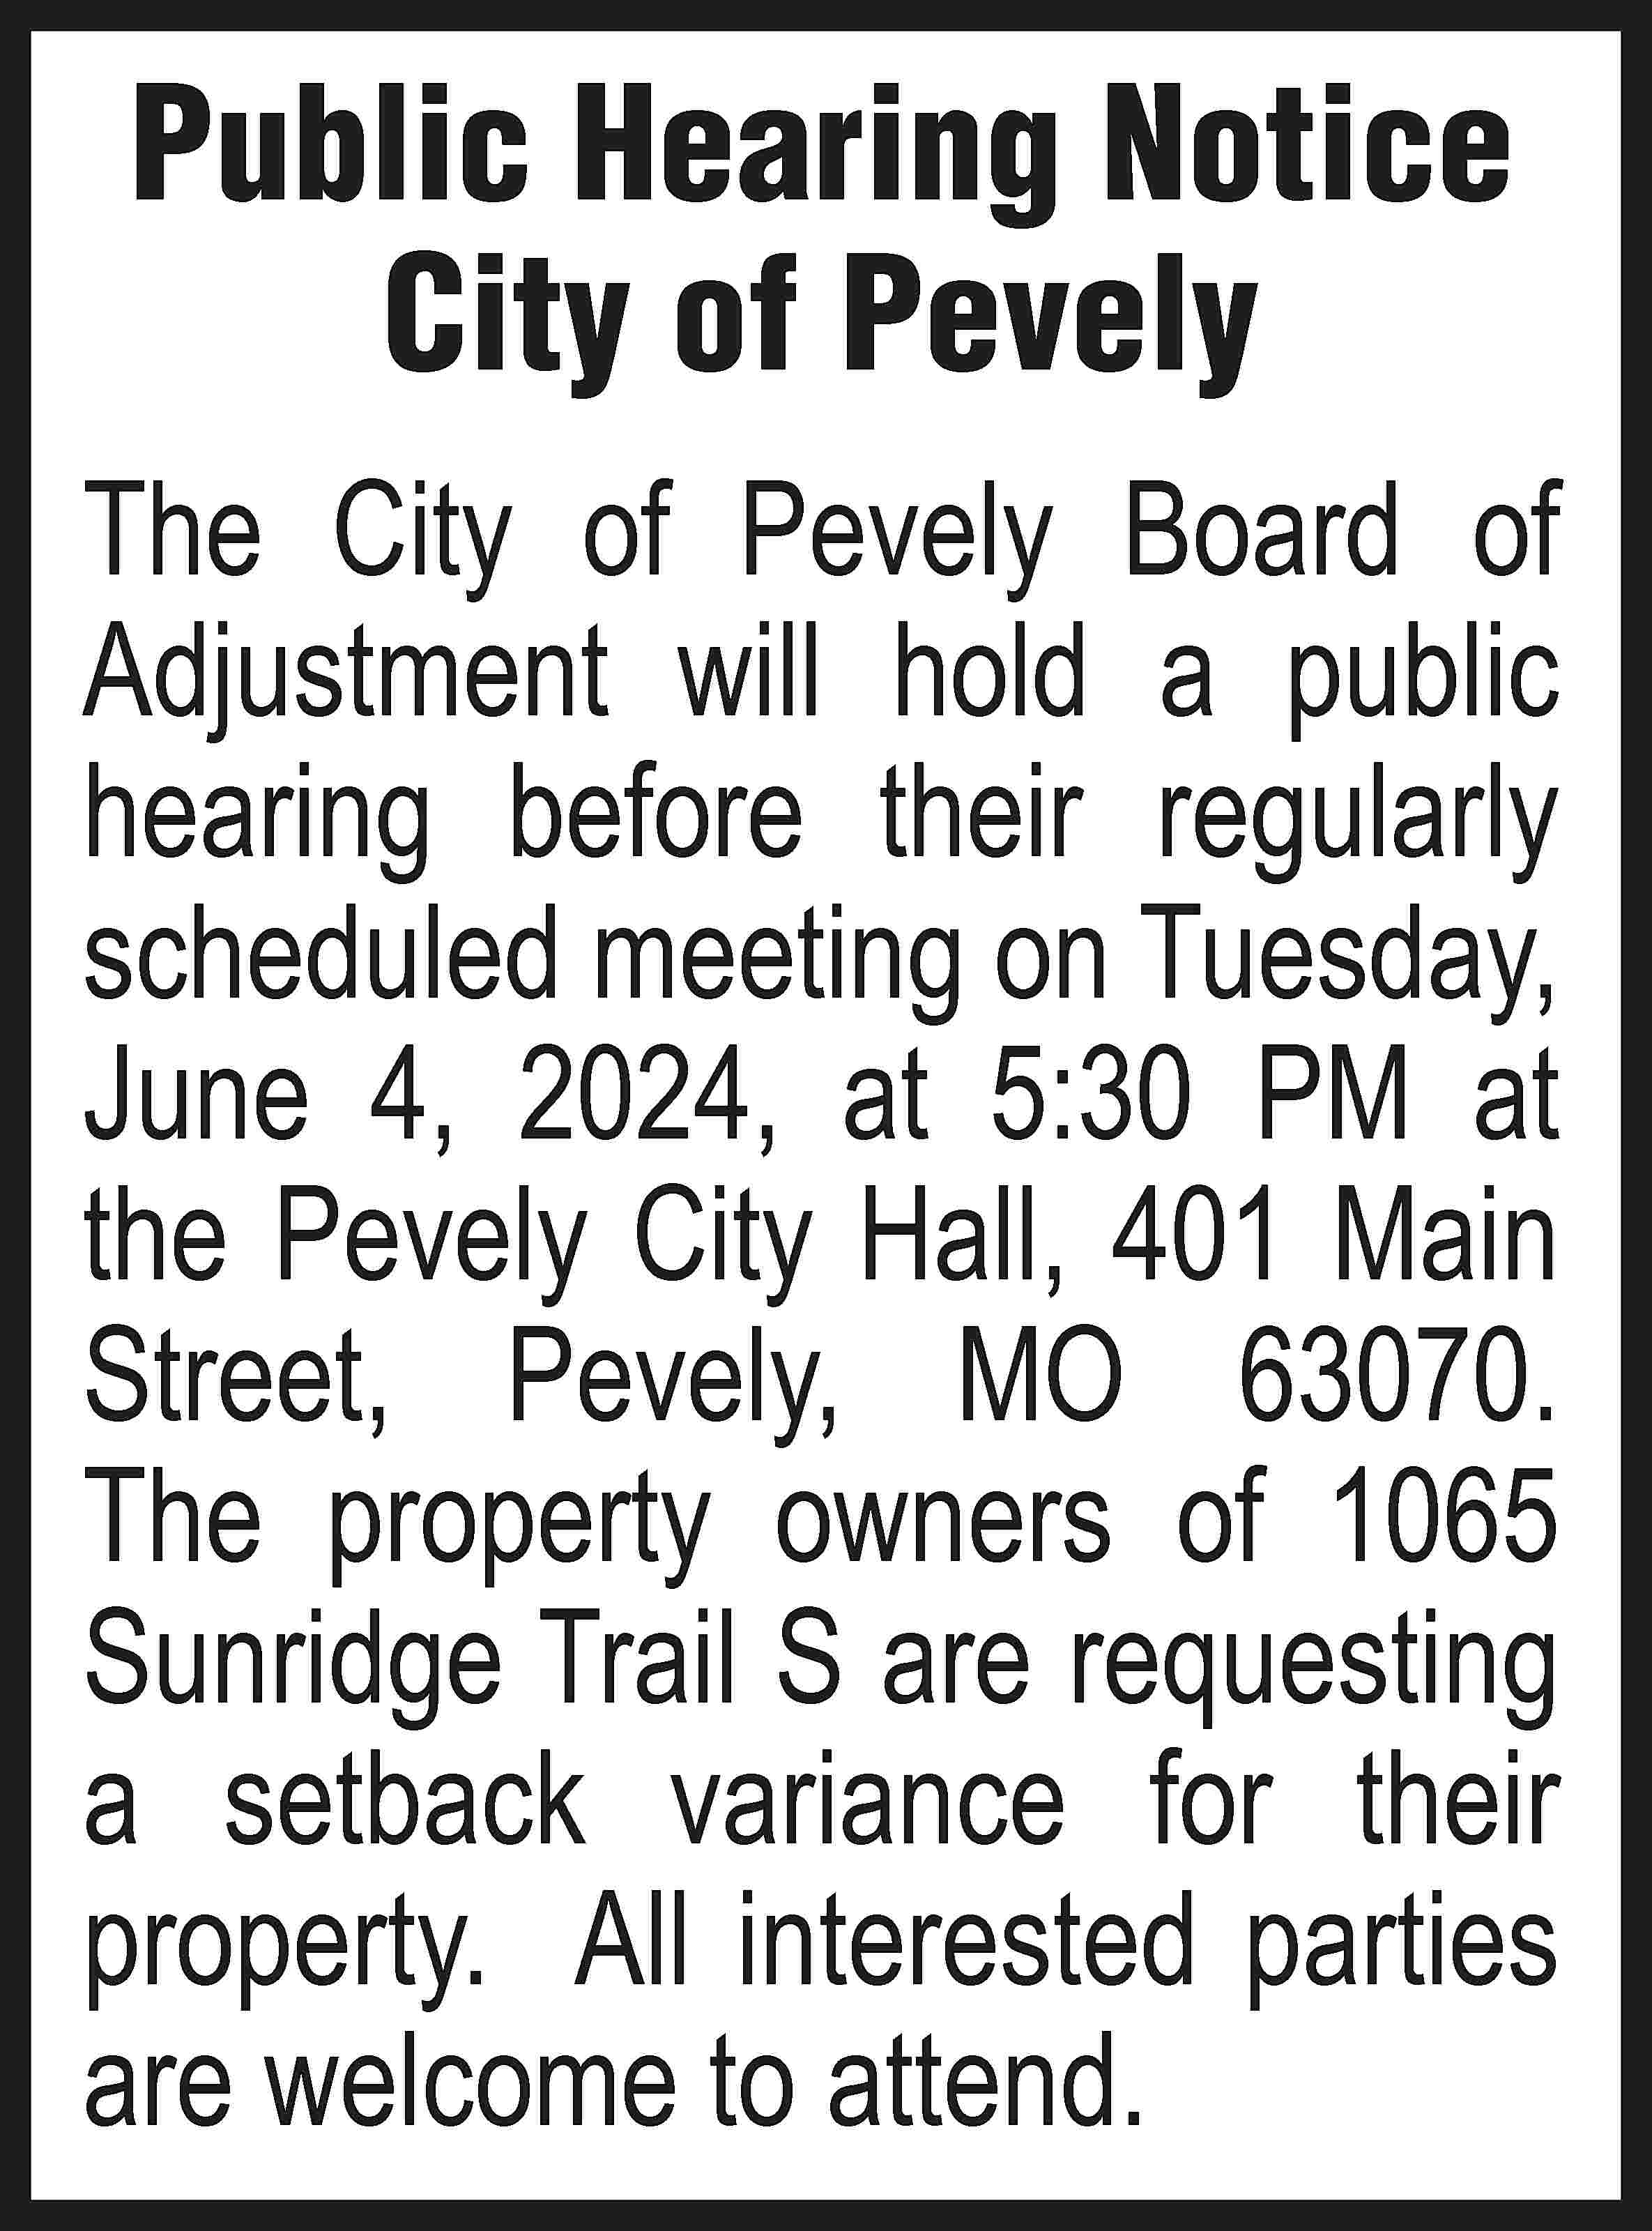 Public Hearing Notice City of  Public Hearing Notice City of Pevely The City of Pevely Board of Adjustment will hold a public hearing before their regularly scheduled meeting on Tuesday, June 4, 2024, at 5:30 PM at the Pevely City Hall, 401 Main Street, Pevely, MO 63070. The property owners of 1065 Sunridge Trail S are requesting a setback variance for their property. All interested parties are welcome to attend.